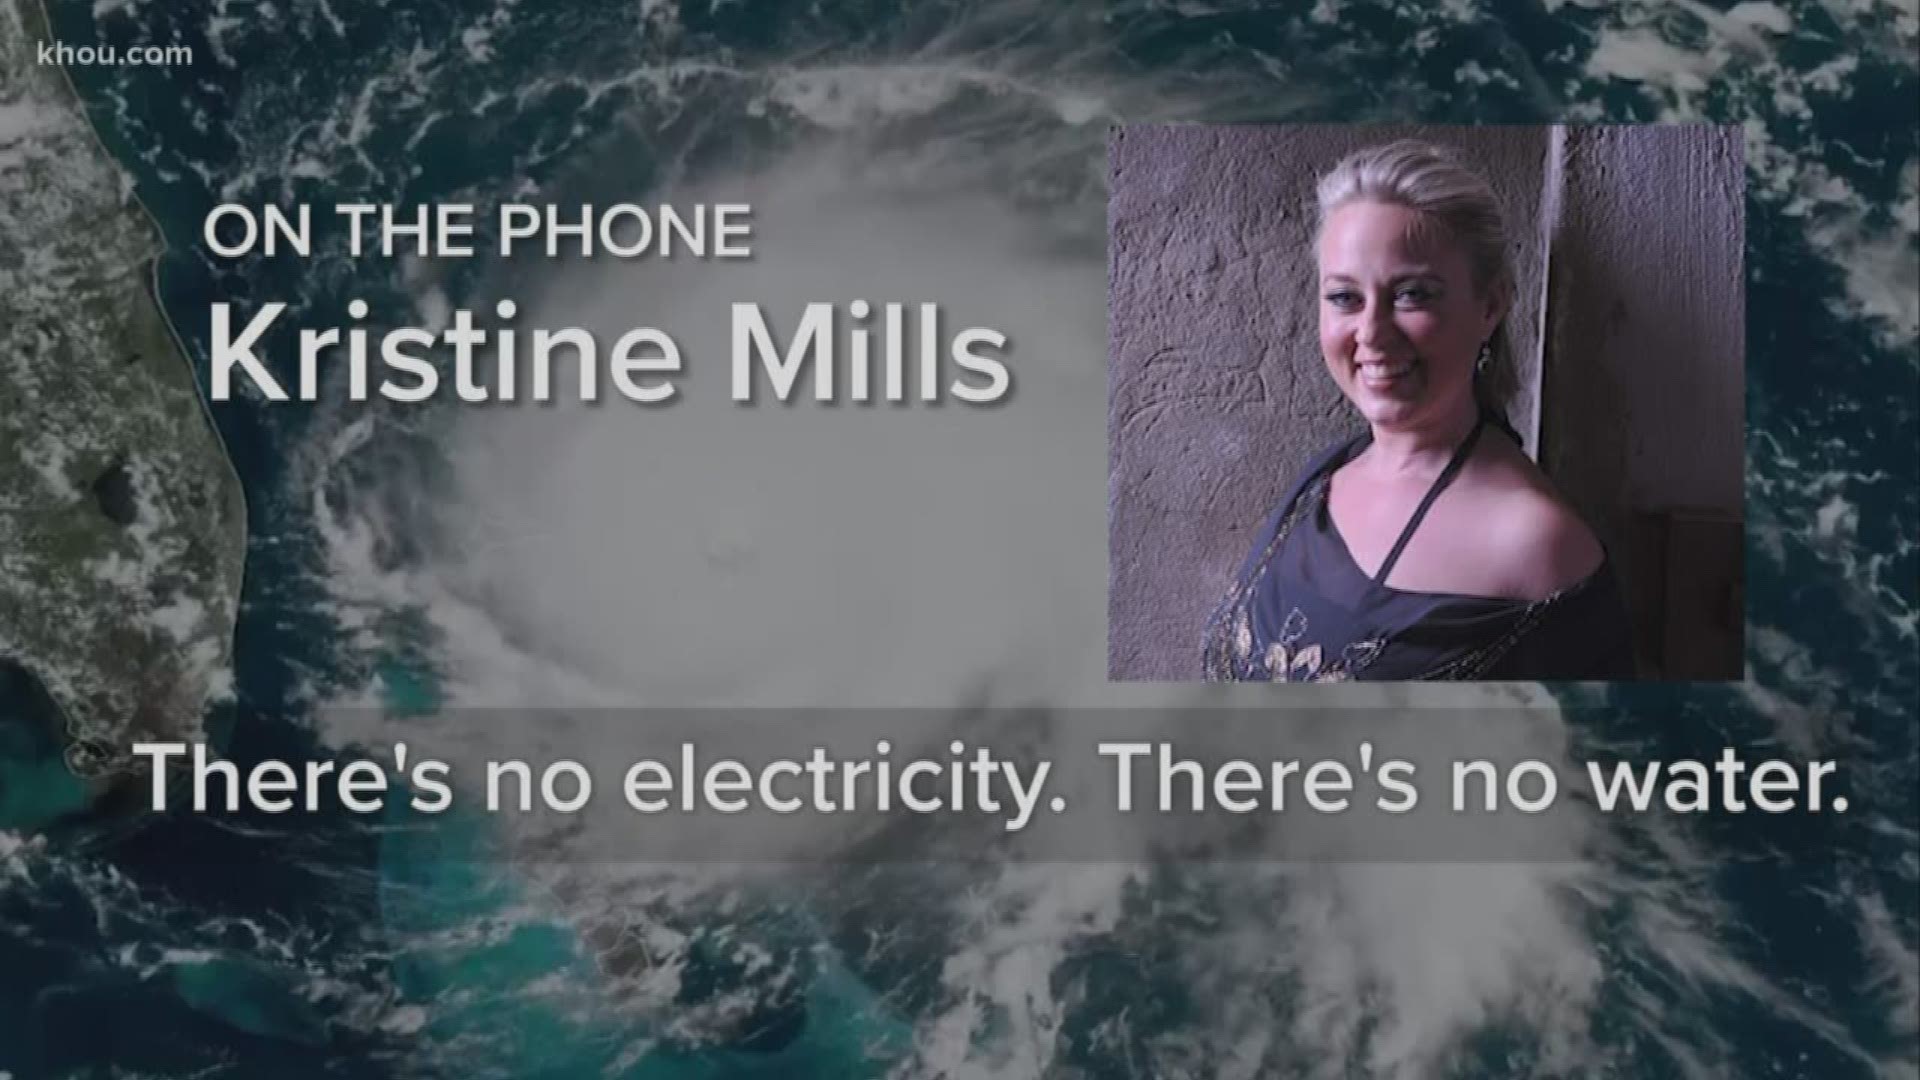 Kristine Mills is a successful singer/songwriter usually seen on a Houston stage, but Monday, she was hunkered down more than a thousand miles away.